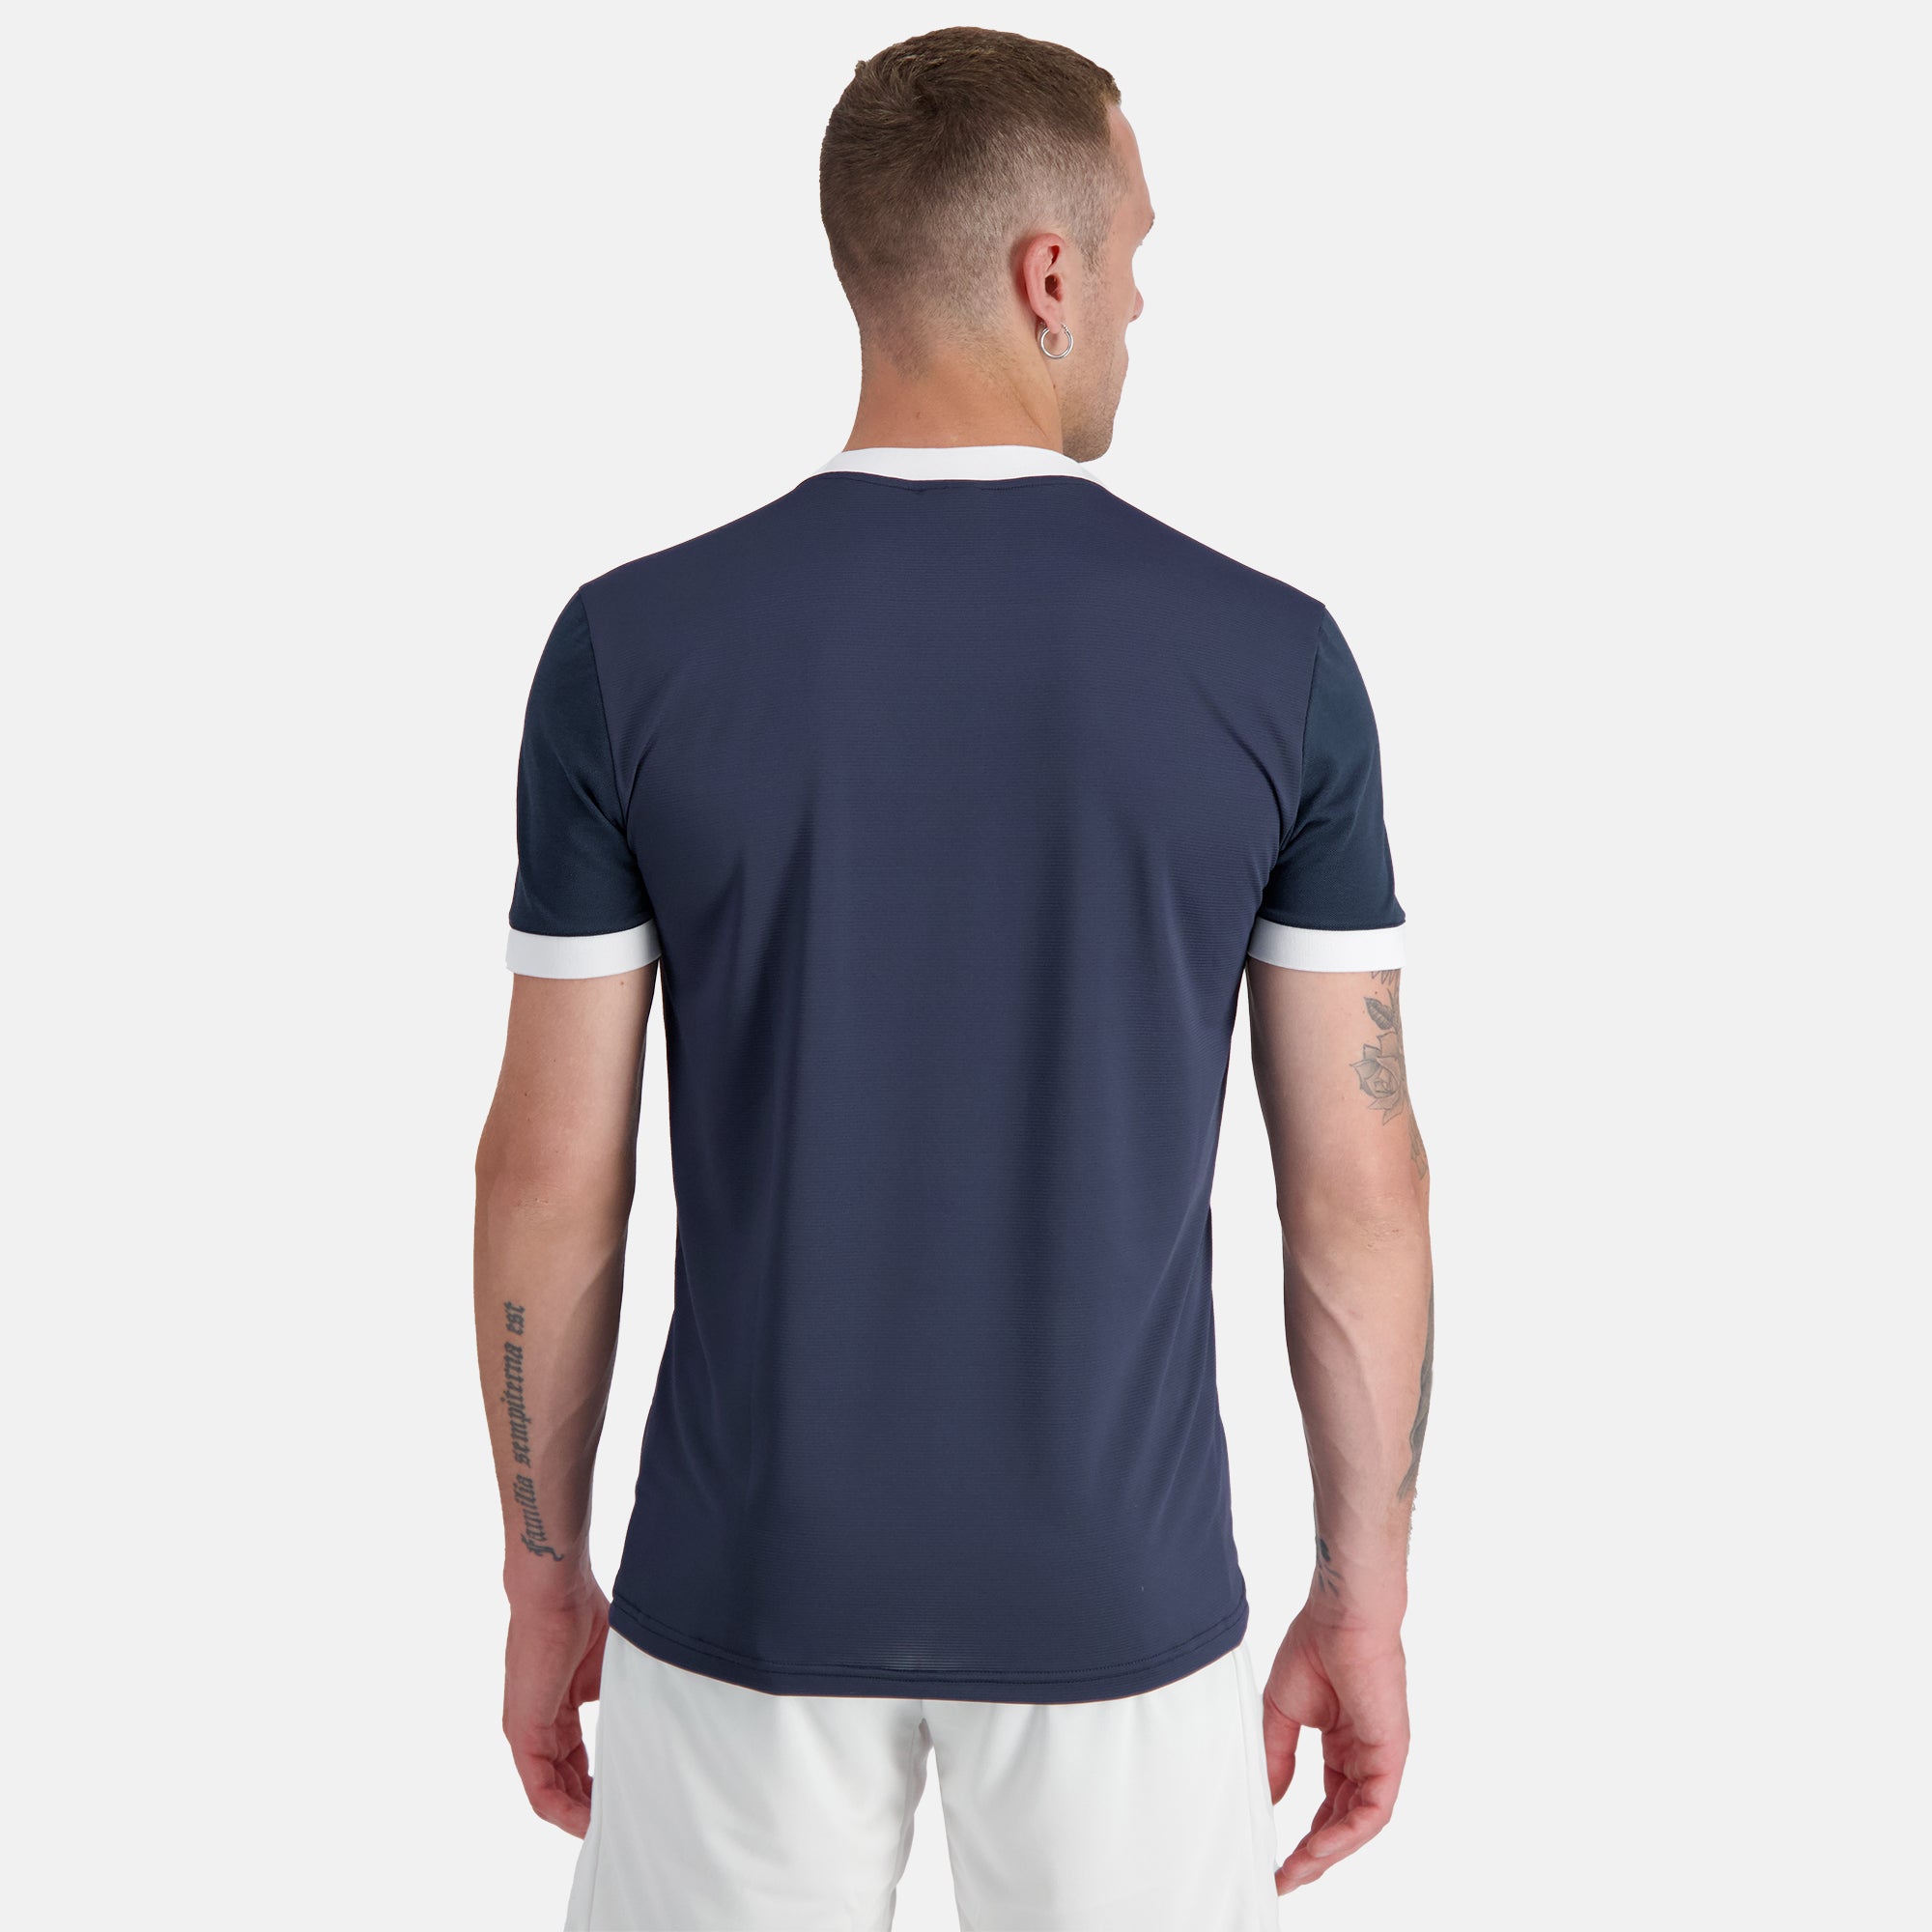 2320140-TENNIS Polo SS N°7 M dress blues/new opt | Polo Homme